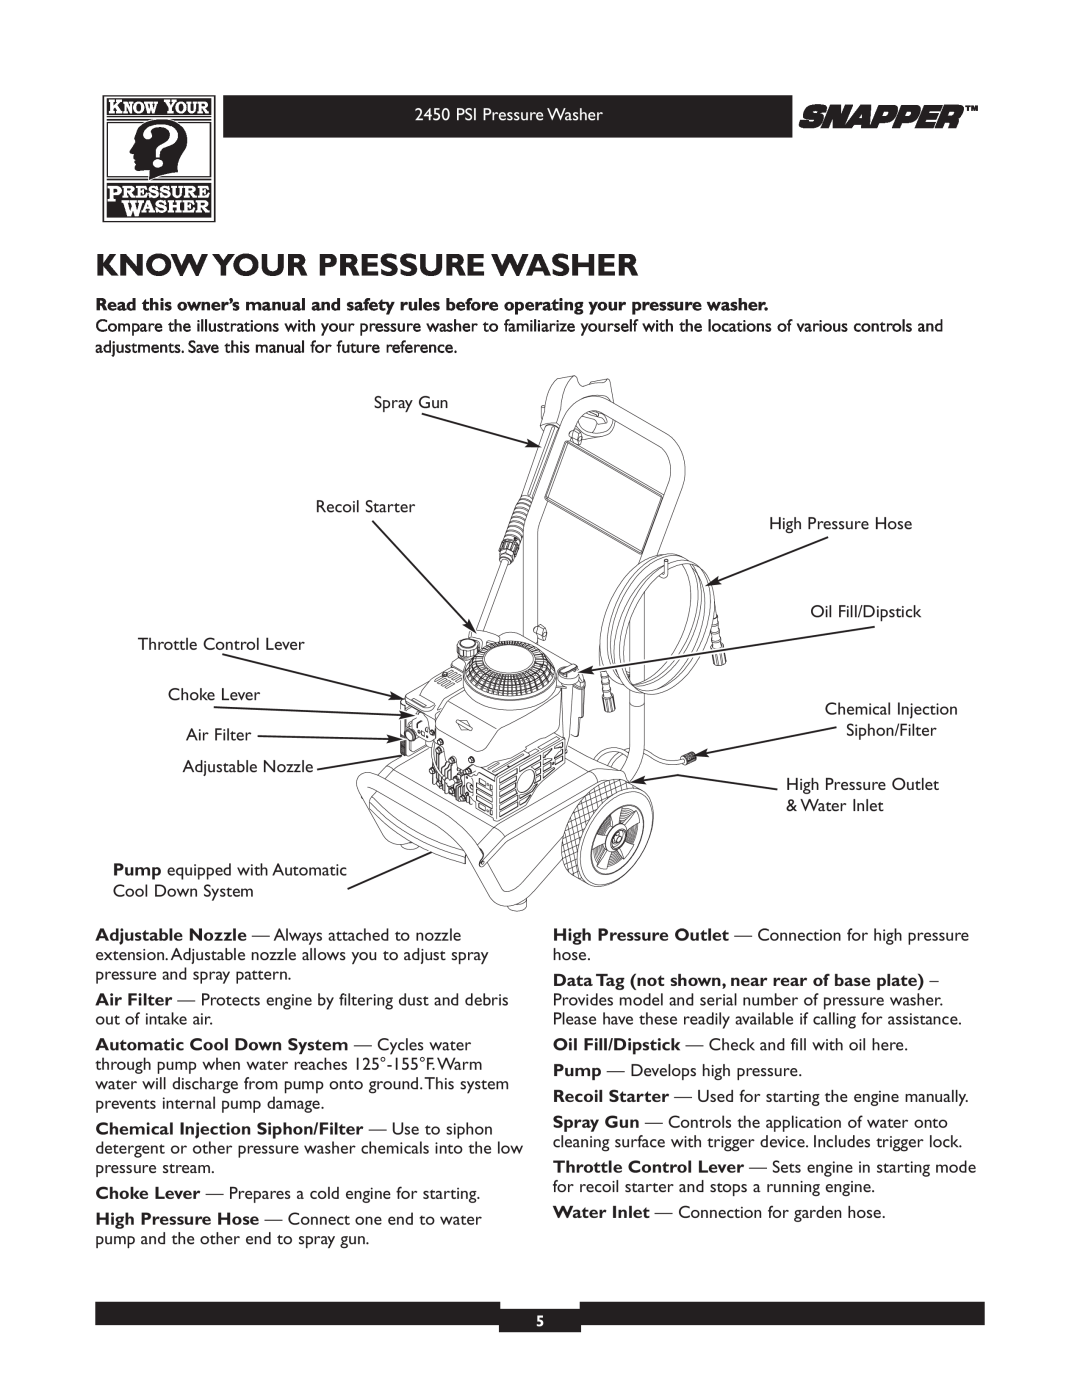 Snapper 020229 owner manual Know Your Pressure Washer, PSI Pressure Washer 